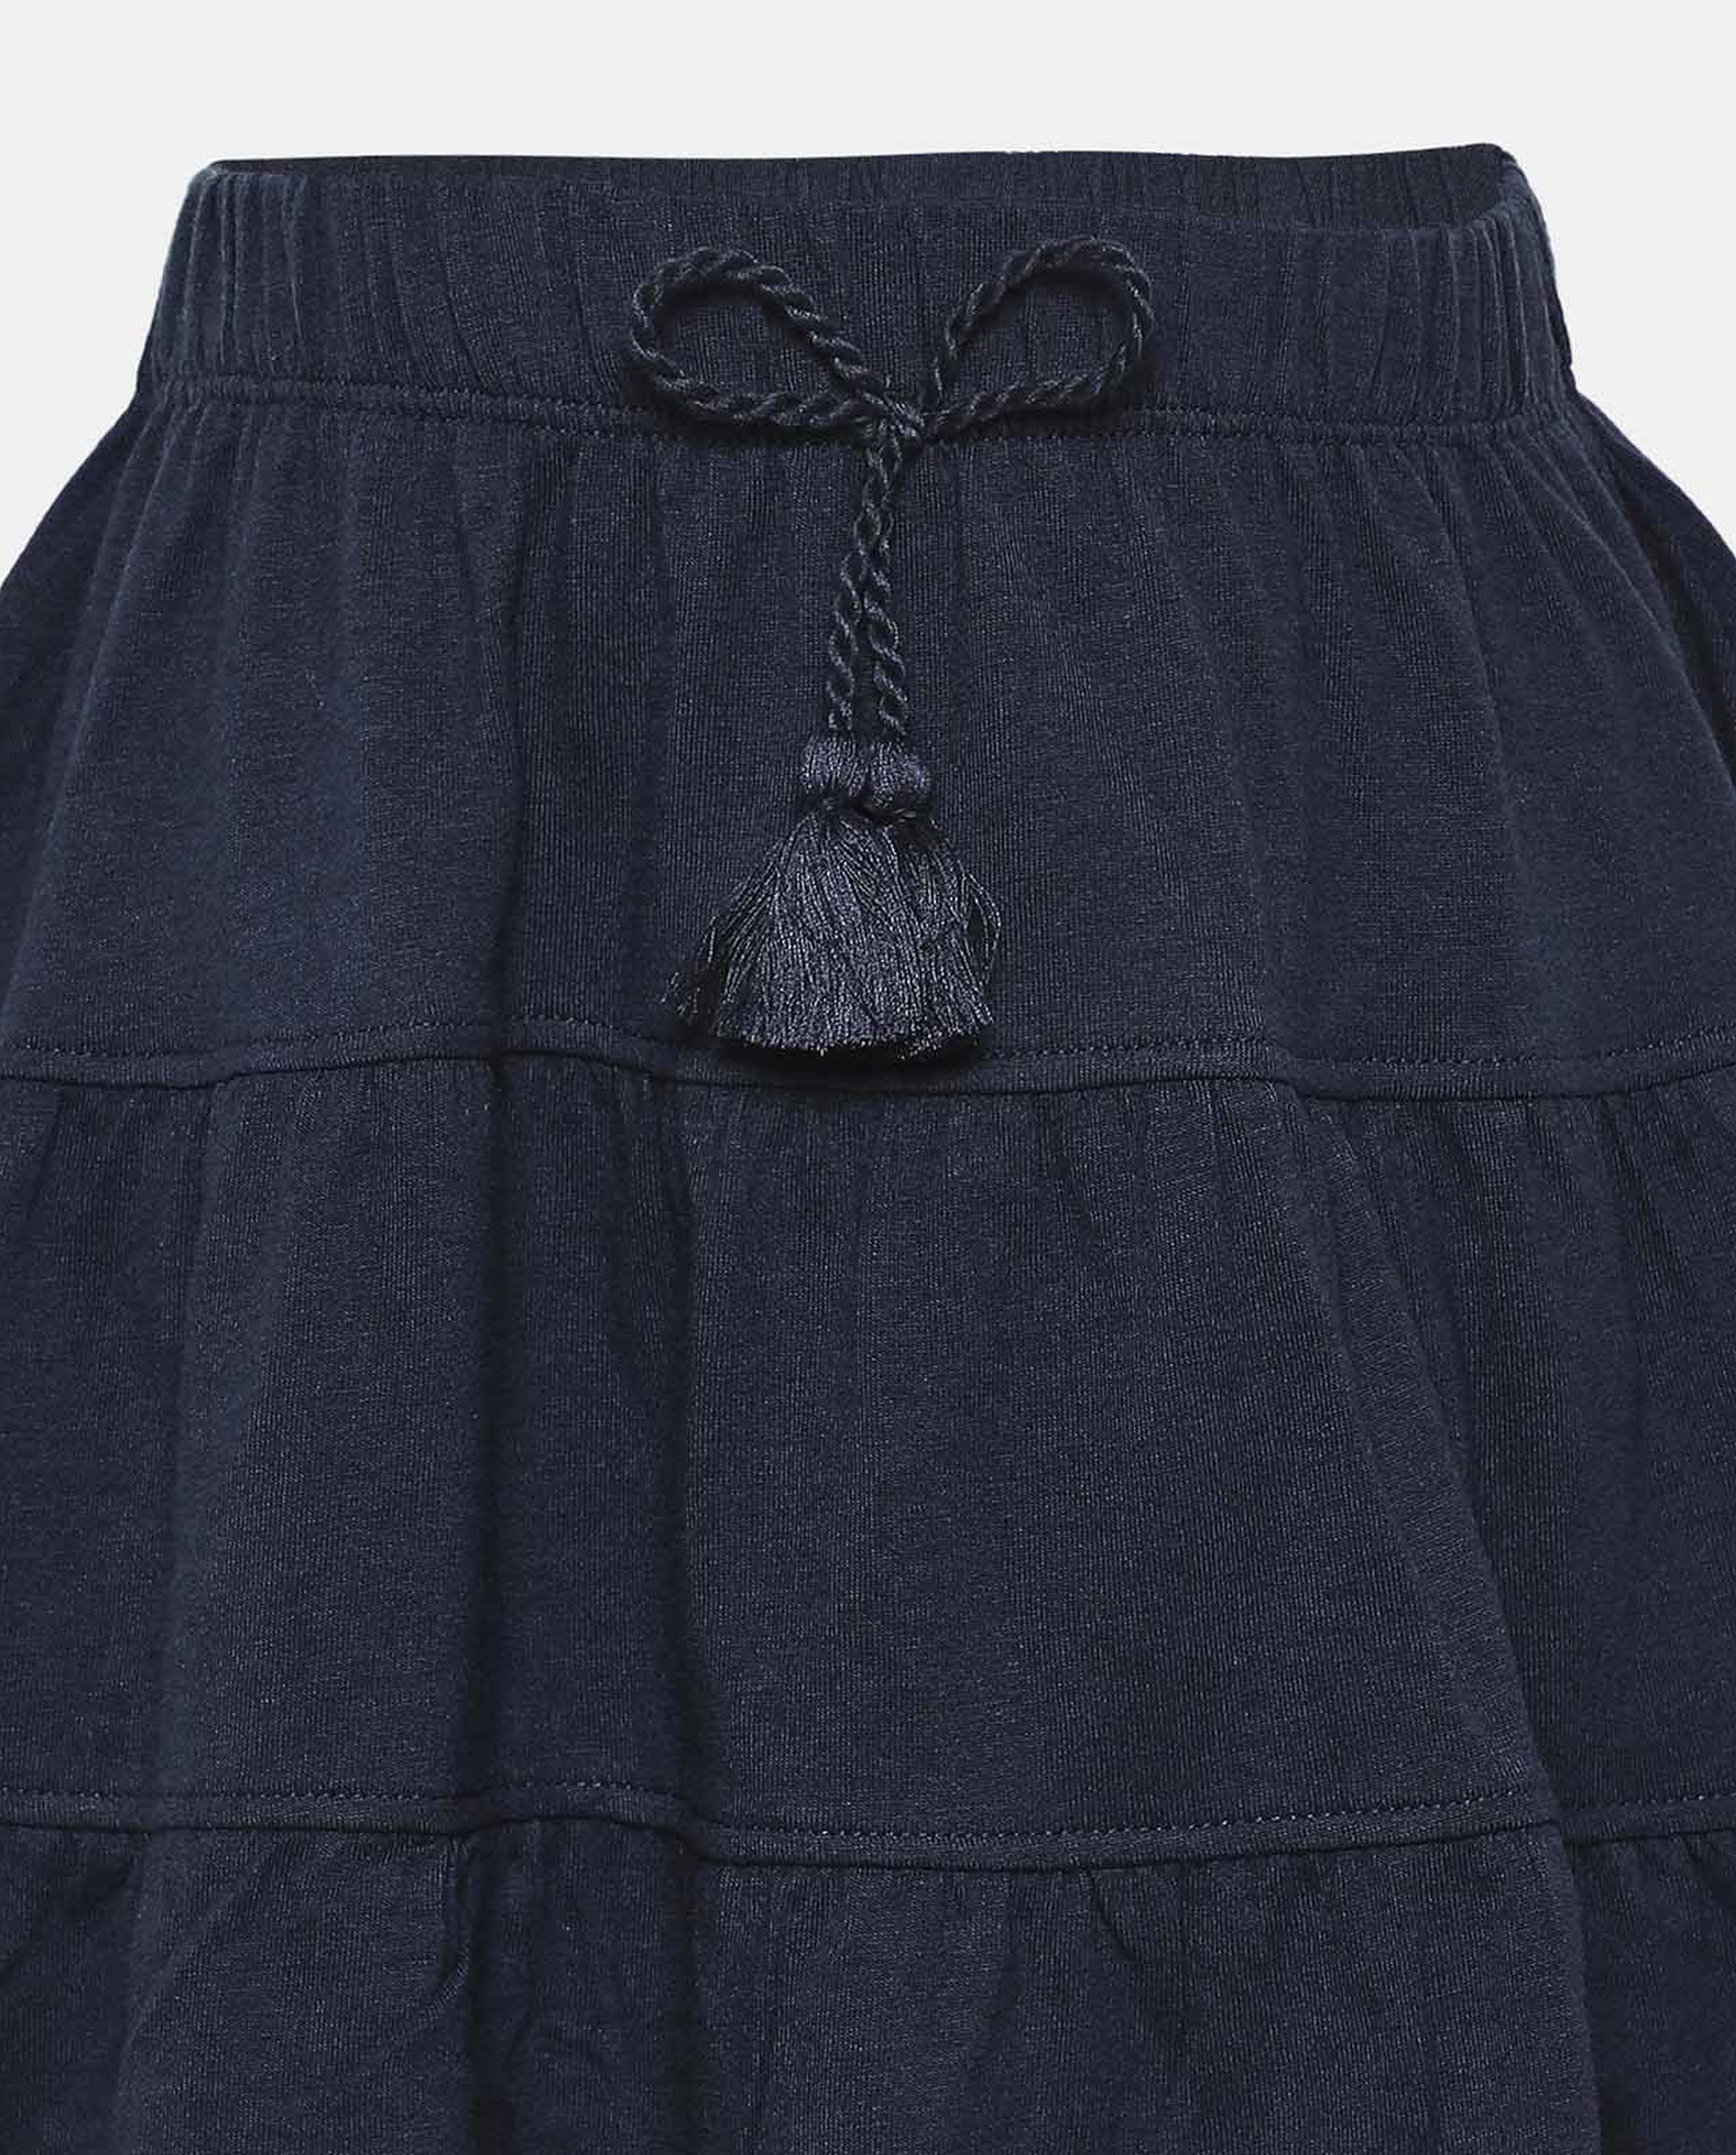 Pack of 2 Tiered Skirts